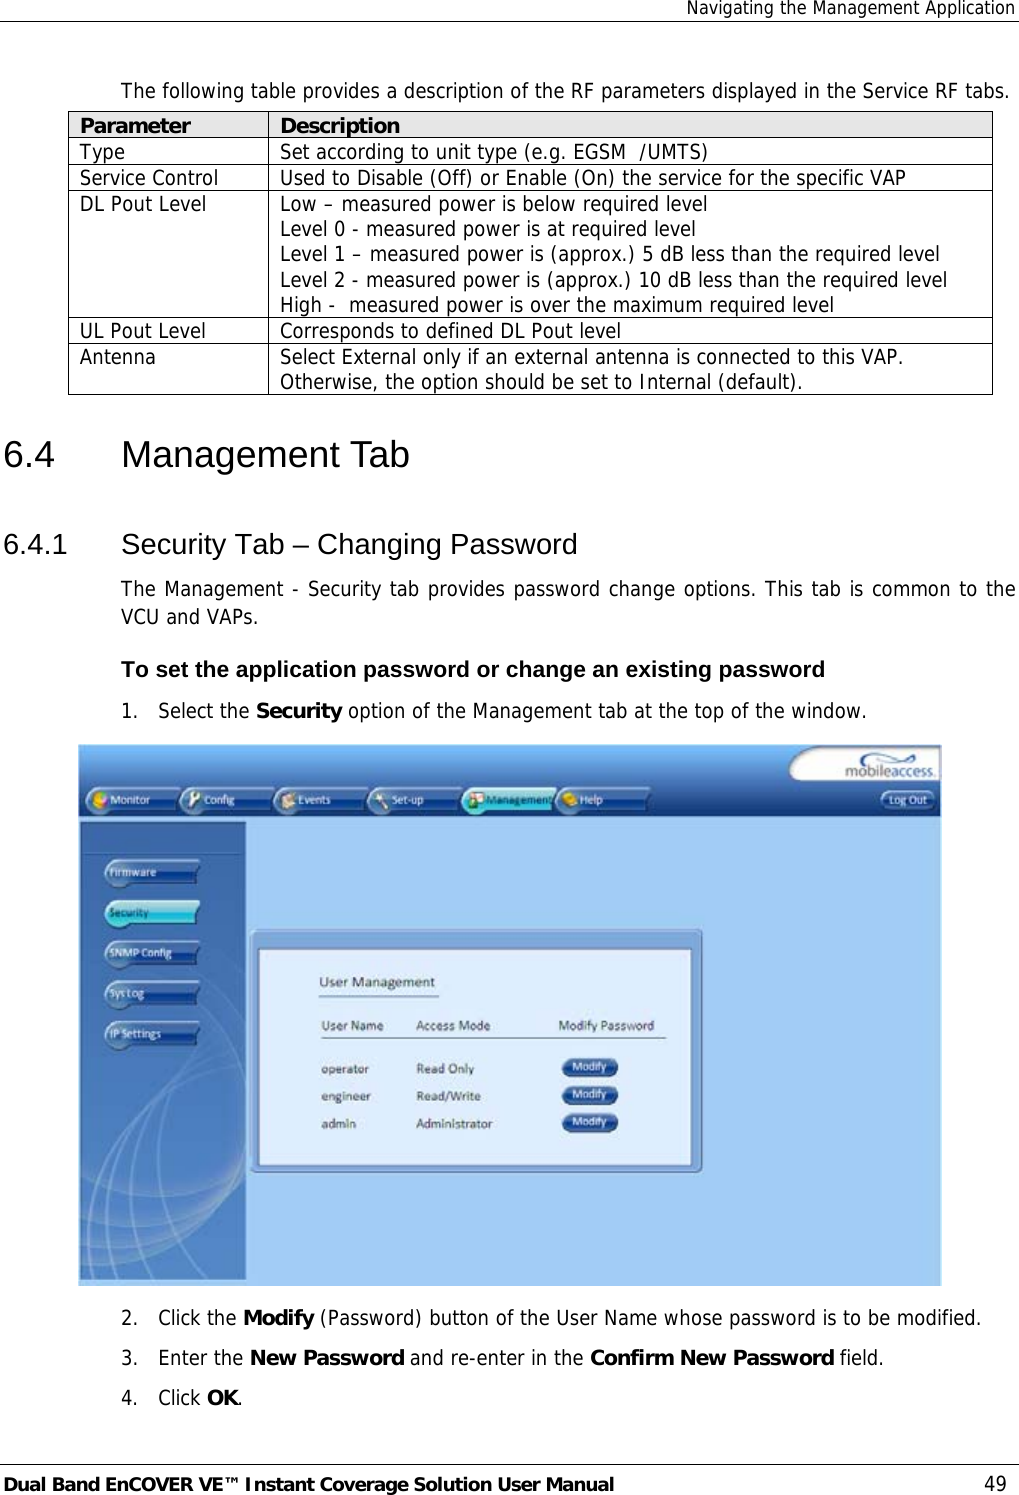 Navigating the Management Application Dual Band EnCOVER VE™ Instant Coverage Solution User Manual  49 The following table provides a description of the RF parameters displayed in the Service RF tabs. Parameter  Description Type  Set according to unit type (e.g. EGSM  /UMTS) Service Control  Used to Disable (Off) or Enable (On) the service for the specific VAP DL Pout Level  Low – measured power is below required level Level 0 - measured power is at required level Level 1 – measured power is (approx.) 5 dB less than the required level Level 2 - measured power is (approx.) 10 dB less than the required level High -  measured power is over the maximum required level UL Pout Level  Corresponds to defined DL Pout level Antenna  Select External only if an external antenna is connected to this VAP. Otherwise, the option should be set to Internal (default). 6.4 Management Tab 6.4.1  Security Tab – Changing Password The Management - Security tab provides password change options. This tab is common to the VCU and VAPs.  To set the application password or change an existing password 1. Select the Security option of the Management tab at the top of the window.  2. Click the Modify (Password) button of the User Name whose password is to be modified.  3. Enter the New Password and re-enter in the Confirm New Password field. 4. Click OK. 